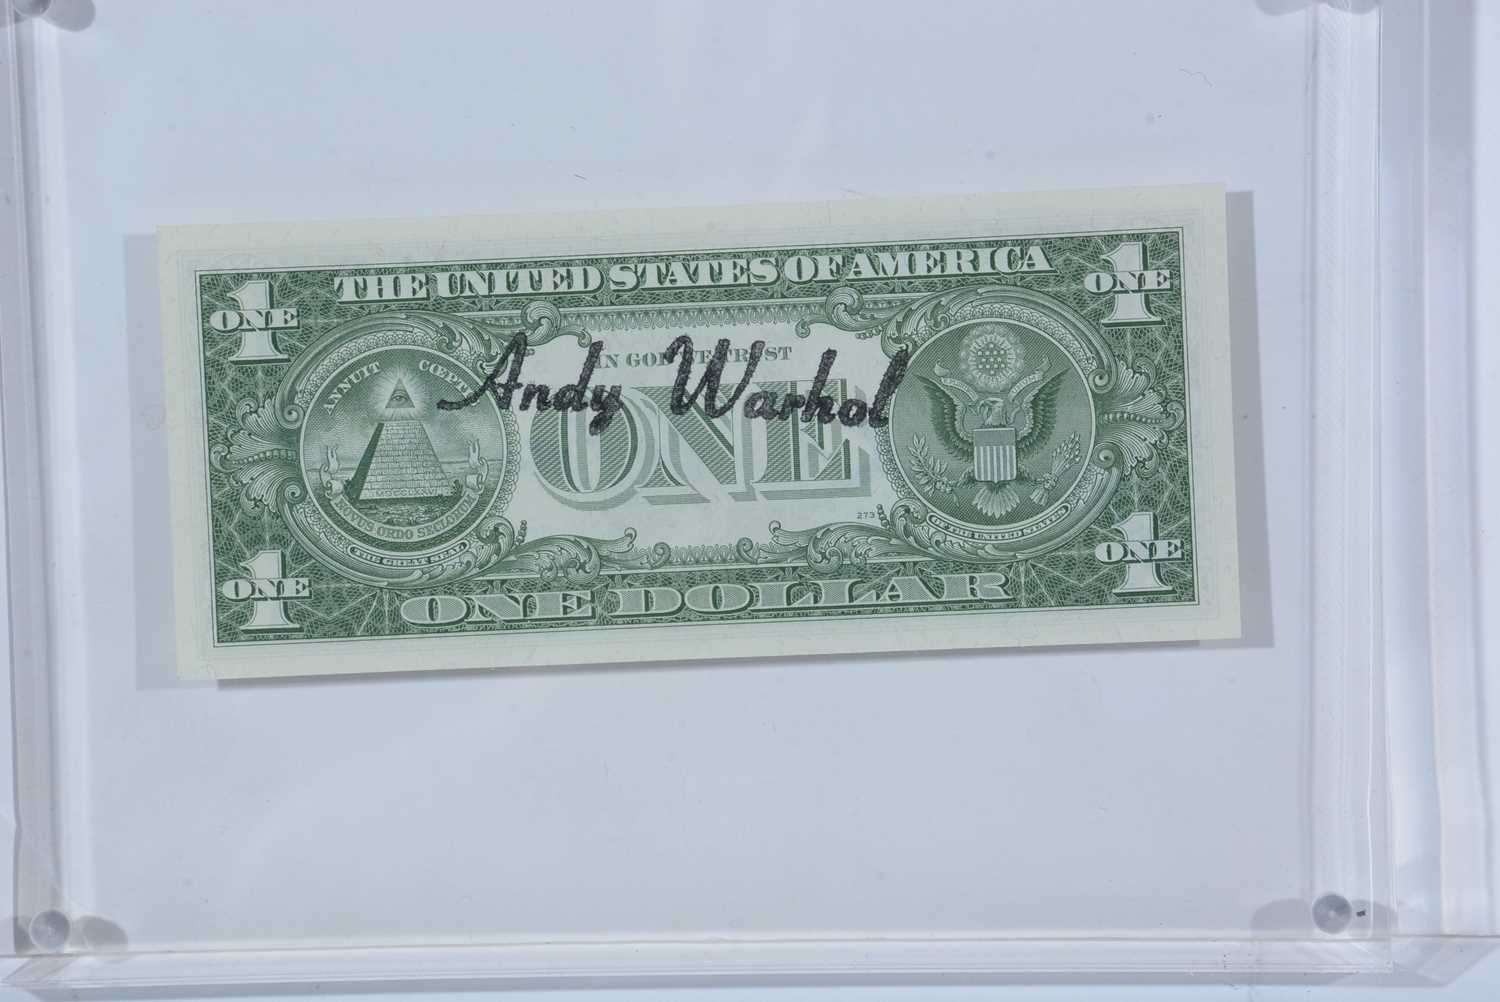 Andy Warhol - Signed One Dollar Bill (George Washington) | pen and ink - Image 4 of 4